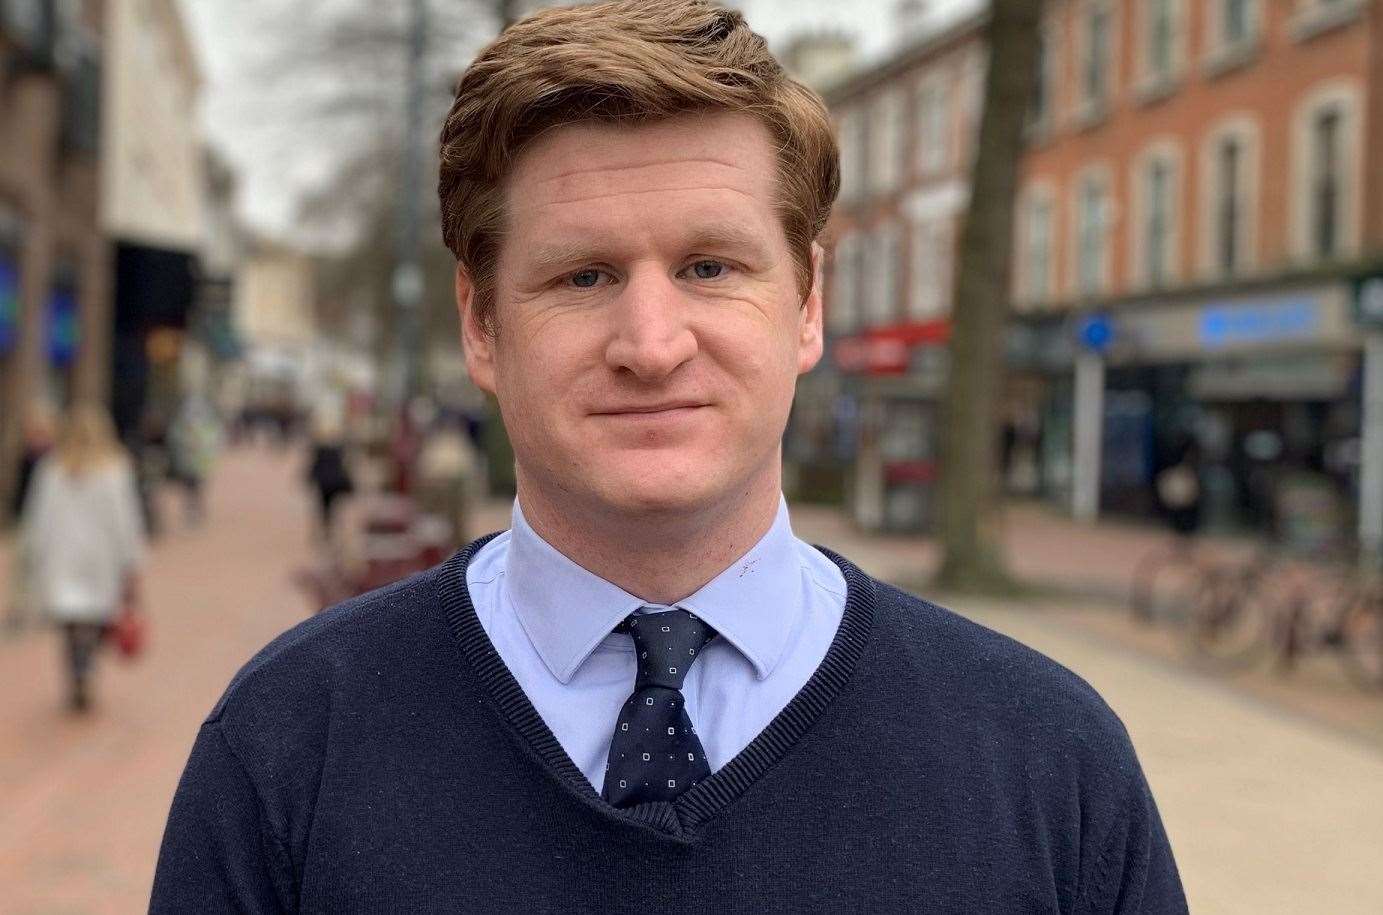 Matthew Scott is the current Kent Police and Crime Commissioner